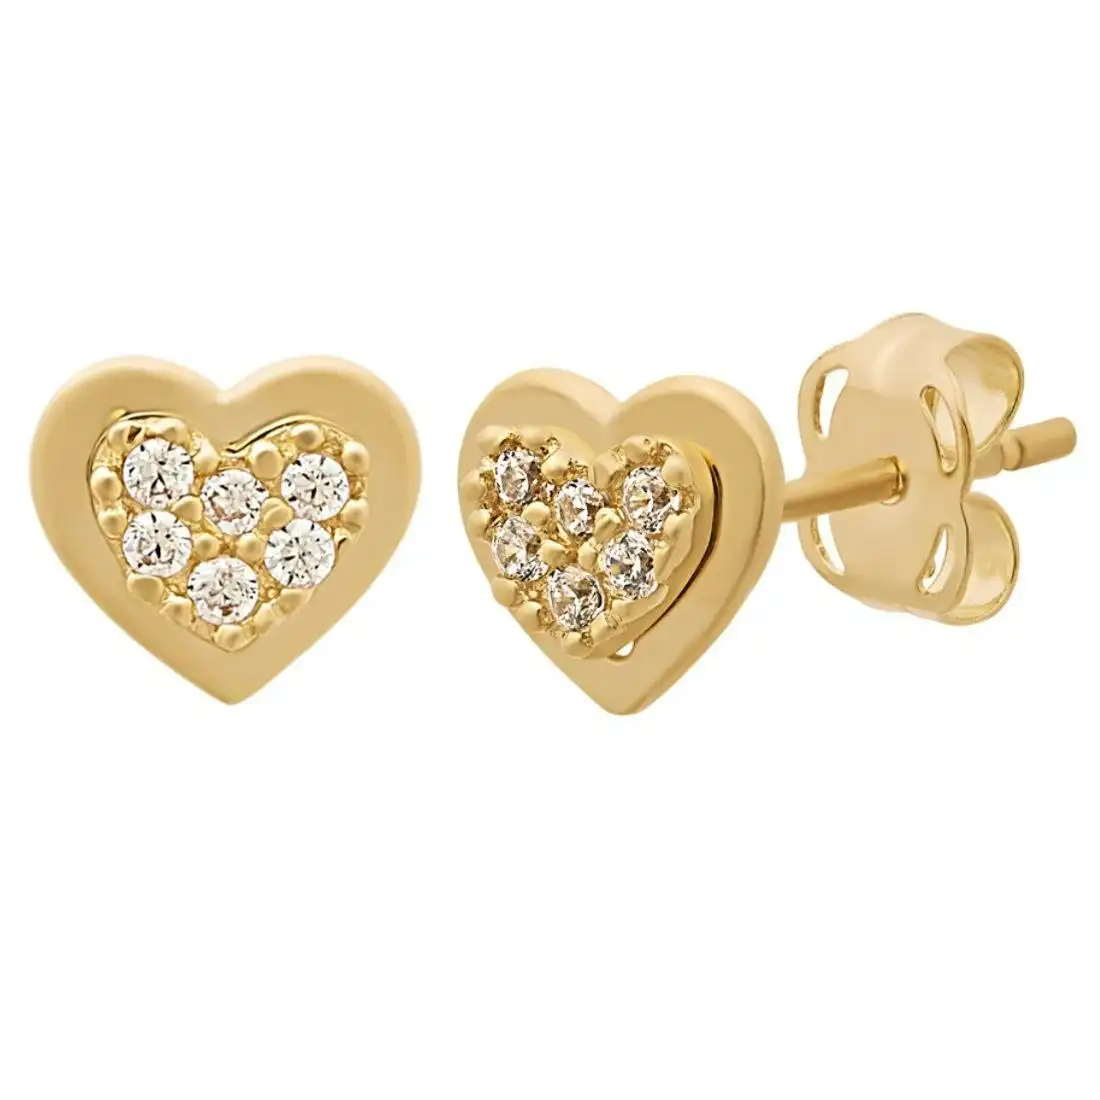 Heart Stud Earrings with Cubic Zirconia in 9ct Yellow Gold